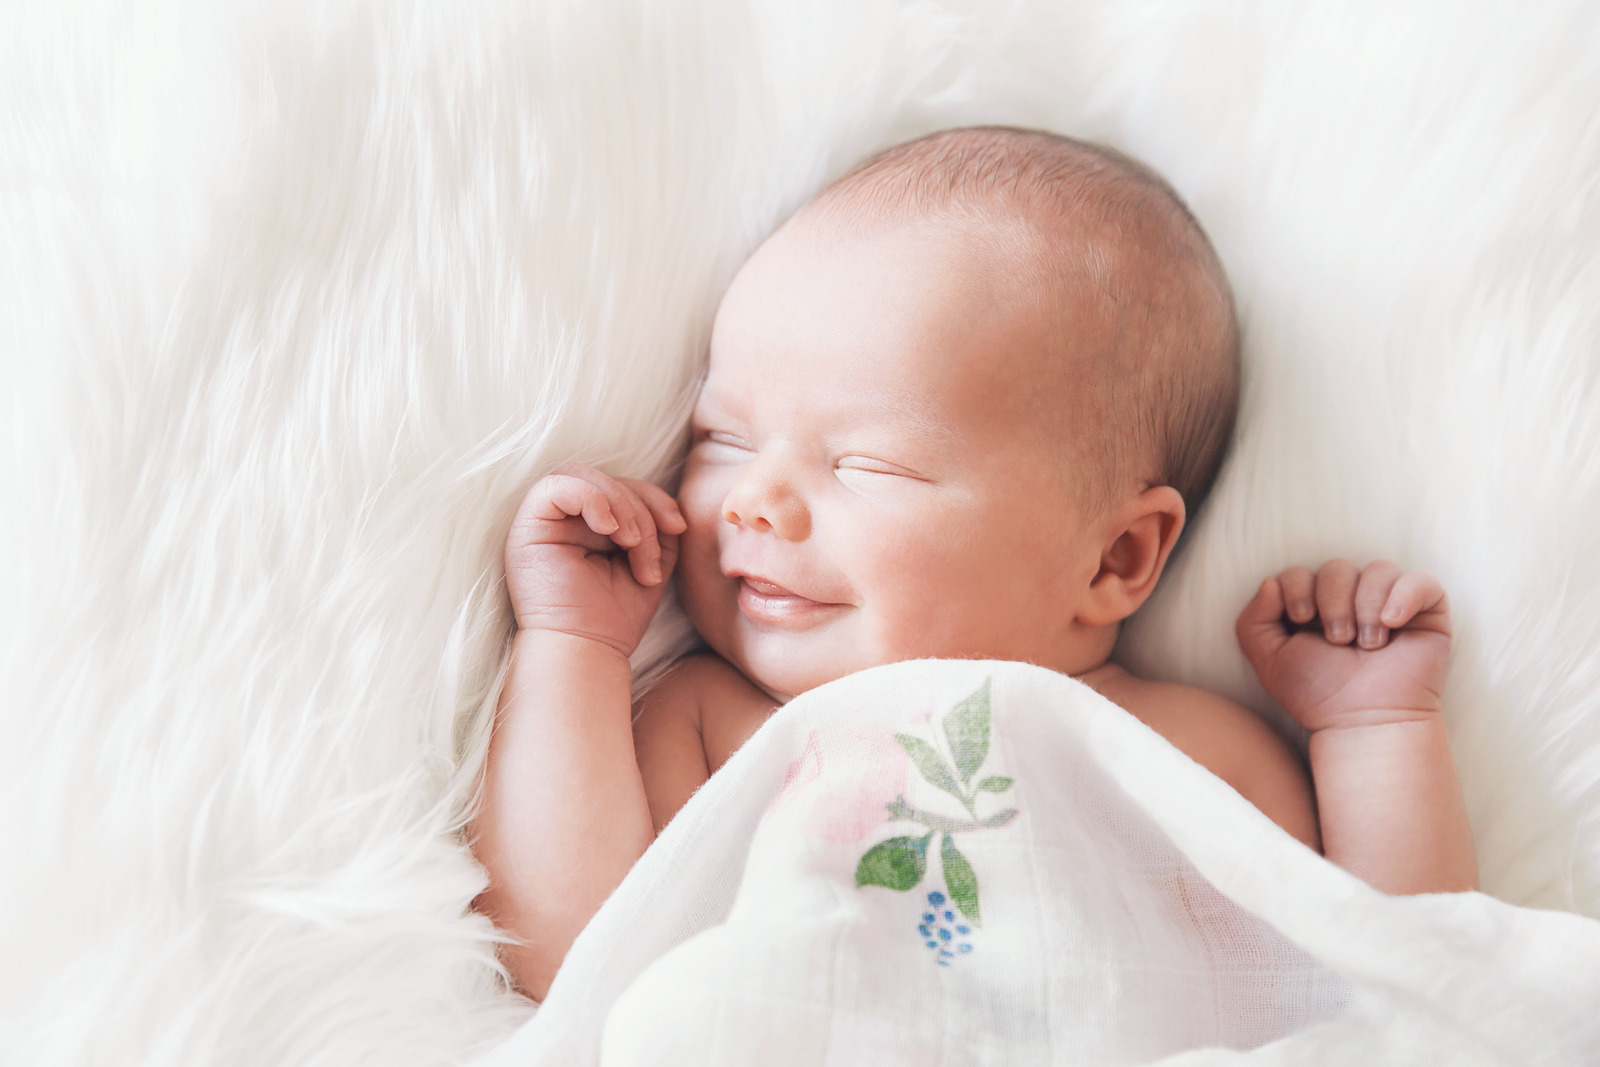 Baby Smiling in His/Her Sleep? Here's Why! - SleepBaby.org